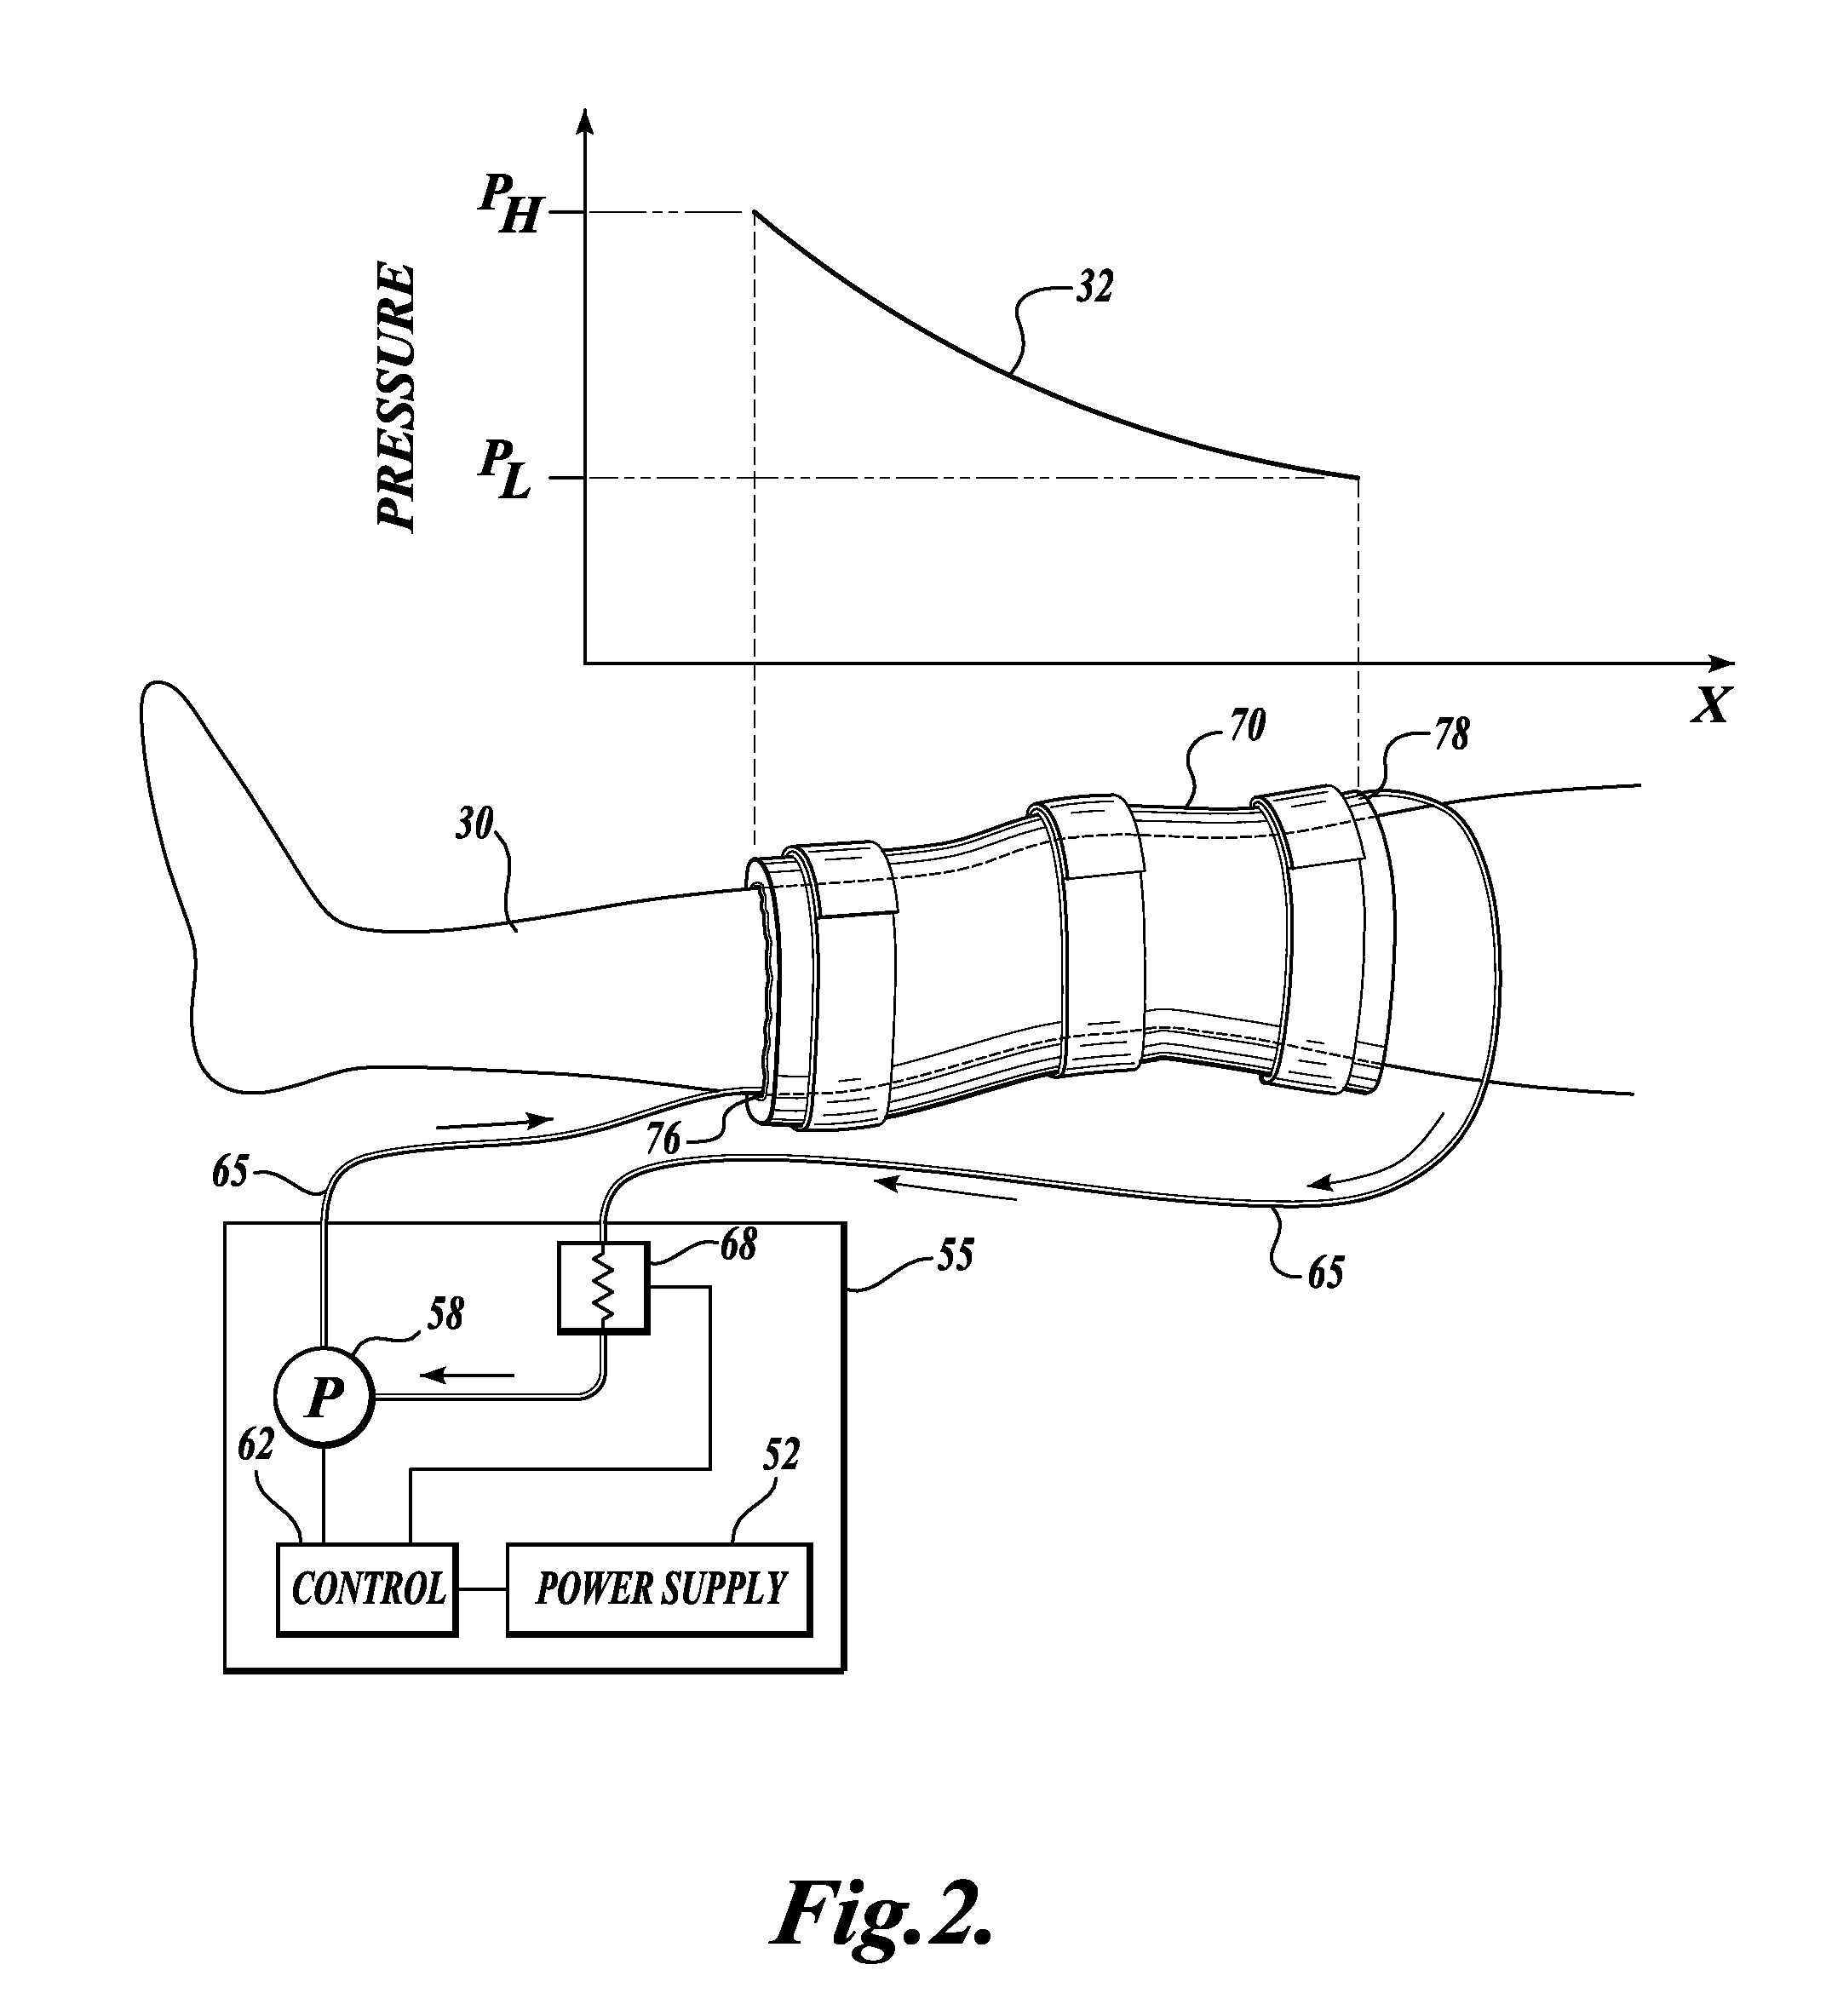 Device for treatment of edema